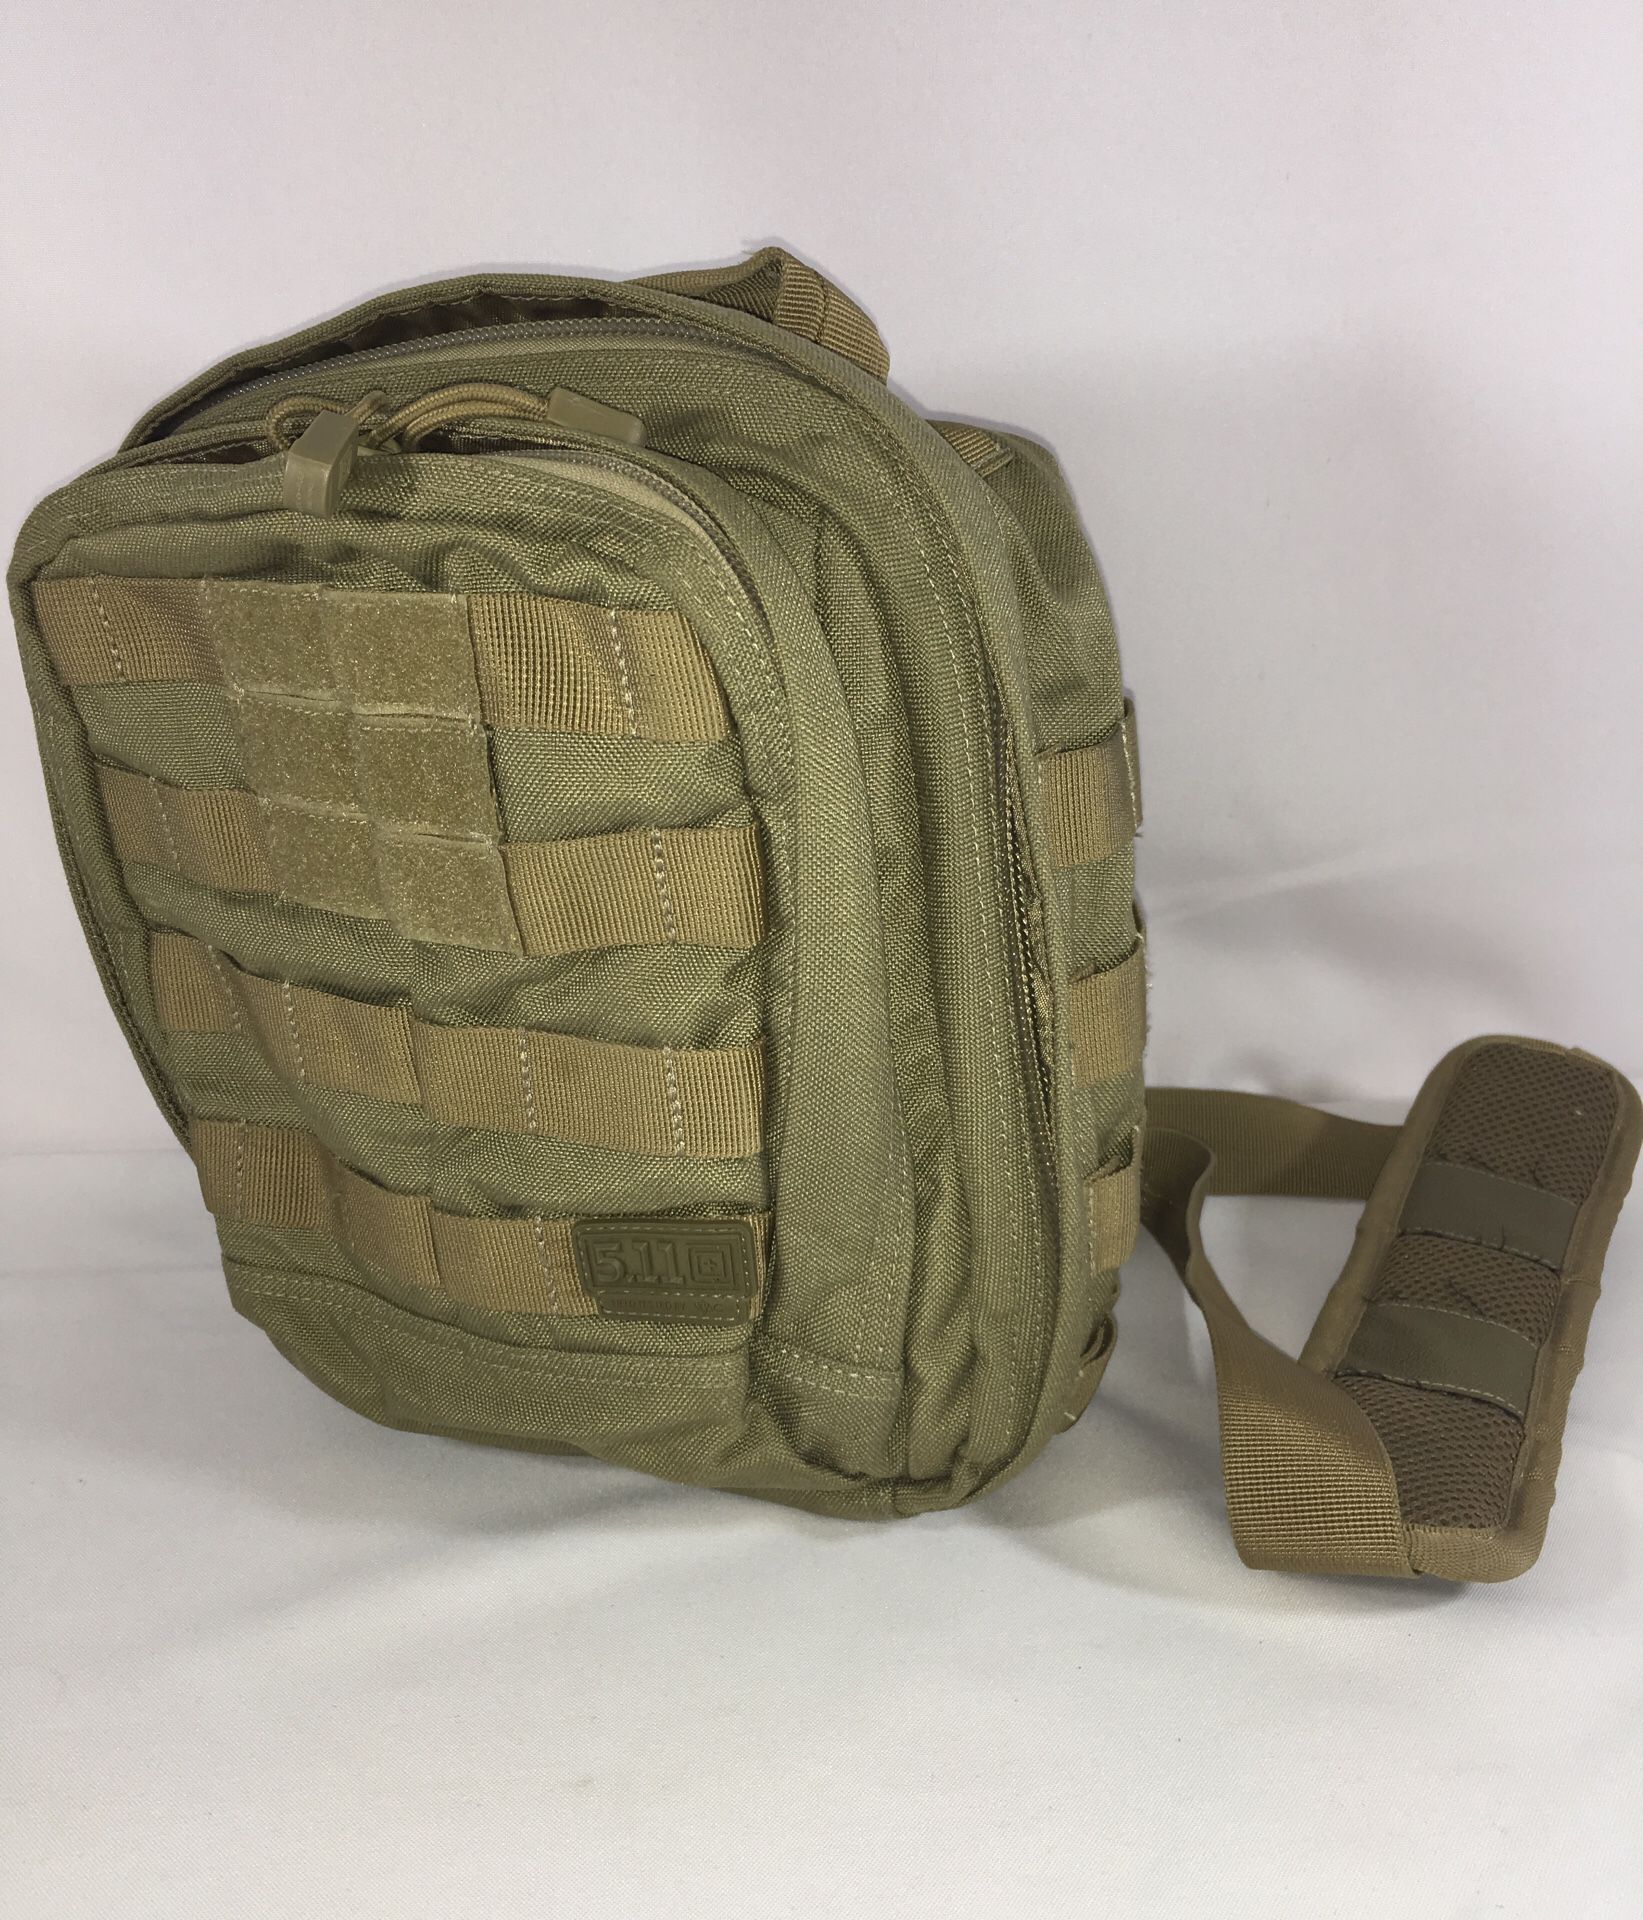 5.11 TACTICAL RUSH MOAB 6 BACKPACK SLING PACK DOUBLE TAP SANDSTONE 1 UNISEX SIZE ADULT